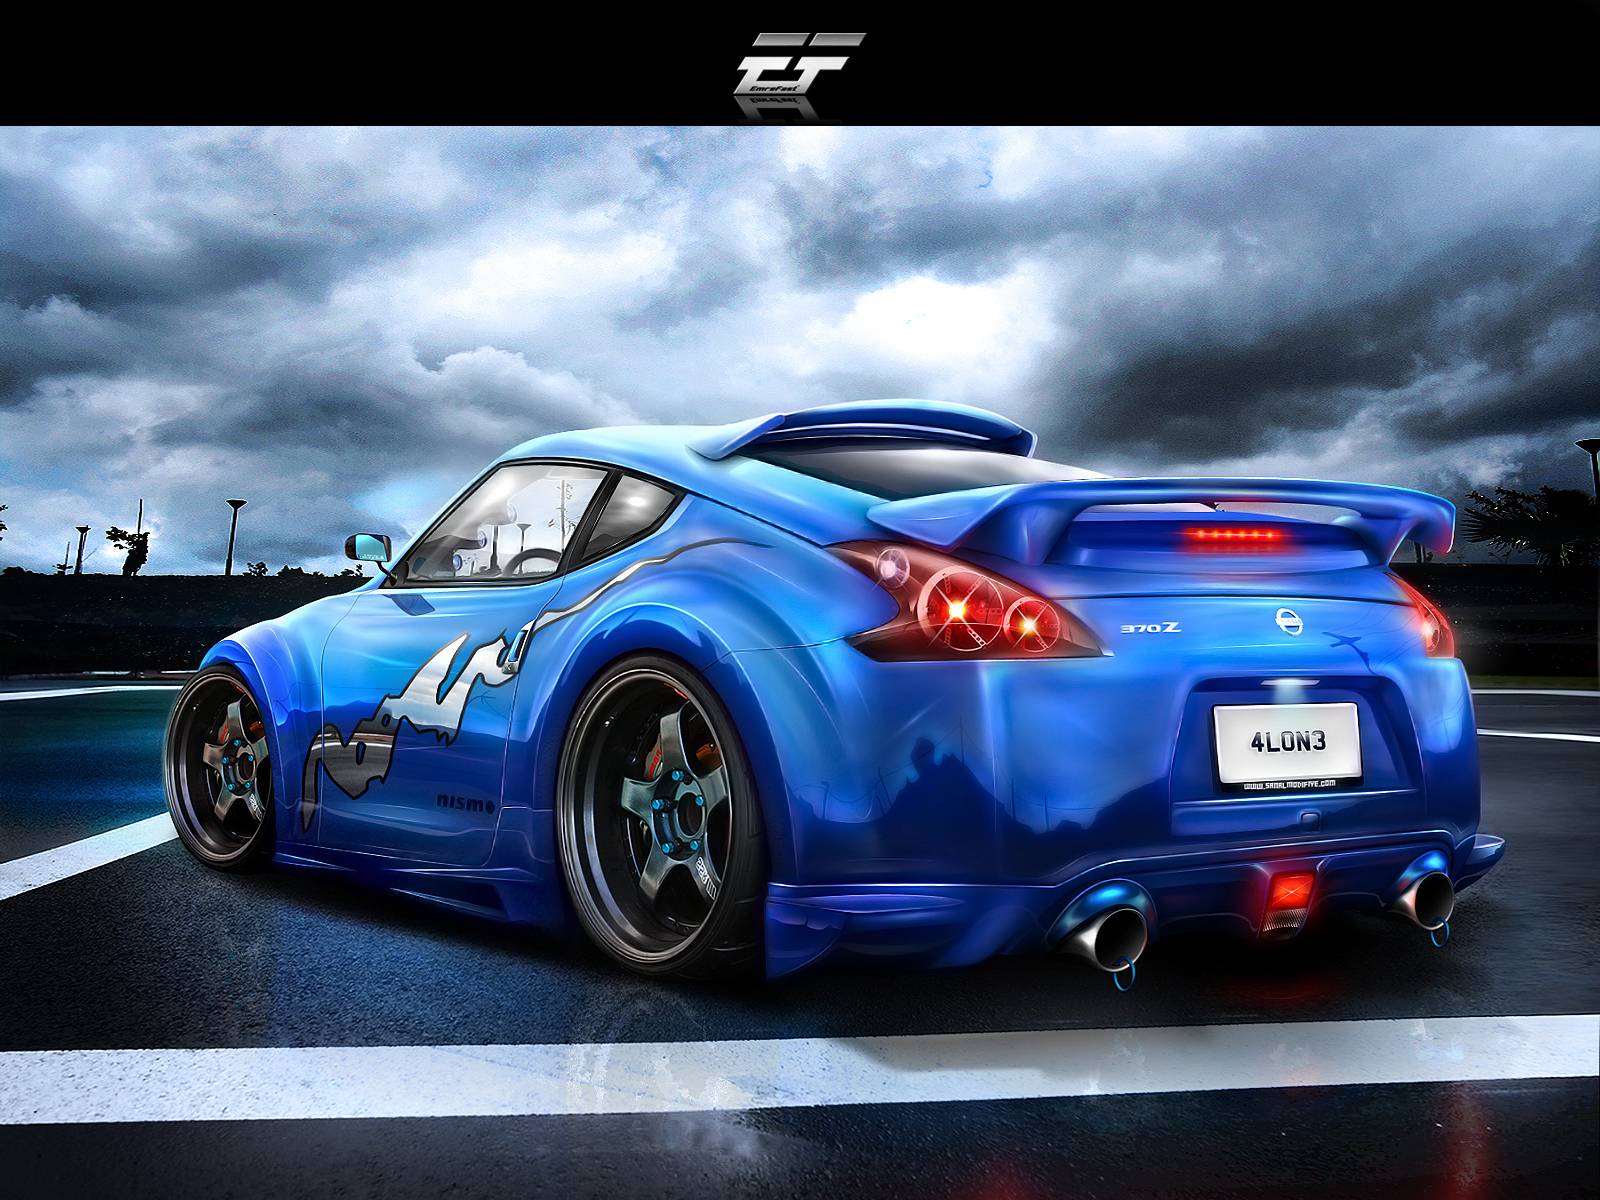 370z Nismo Wallpapers Wallpaper Cave Images, Photos, Reviews